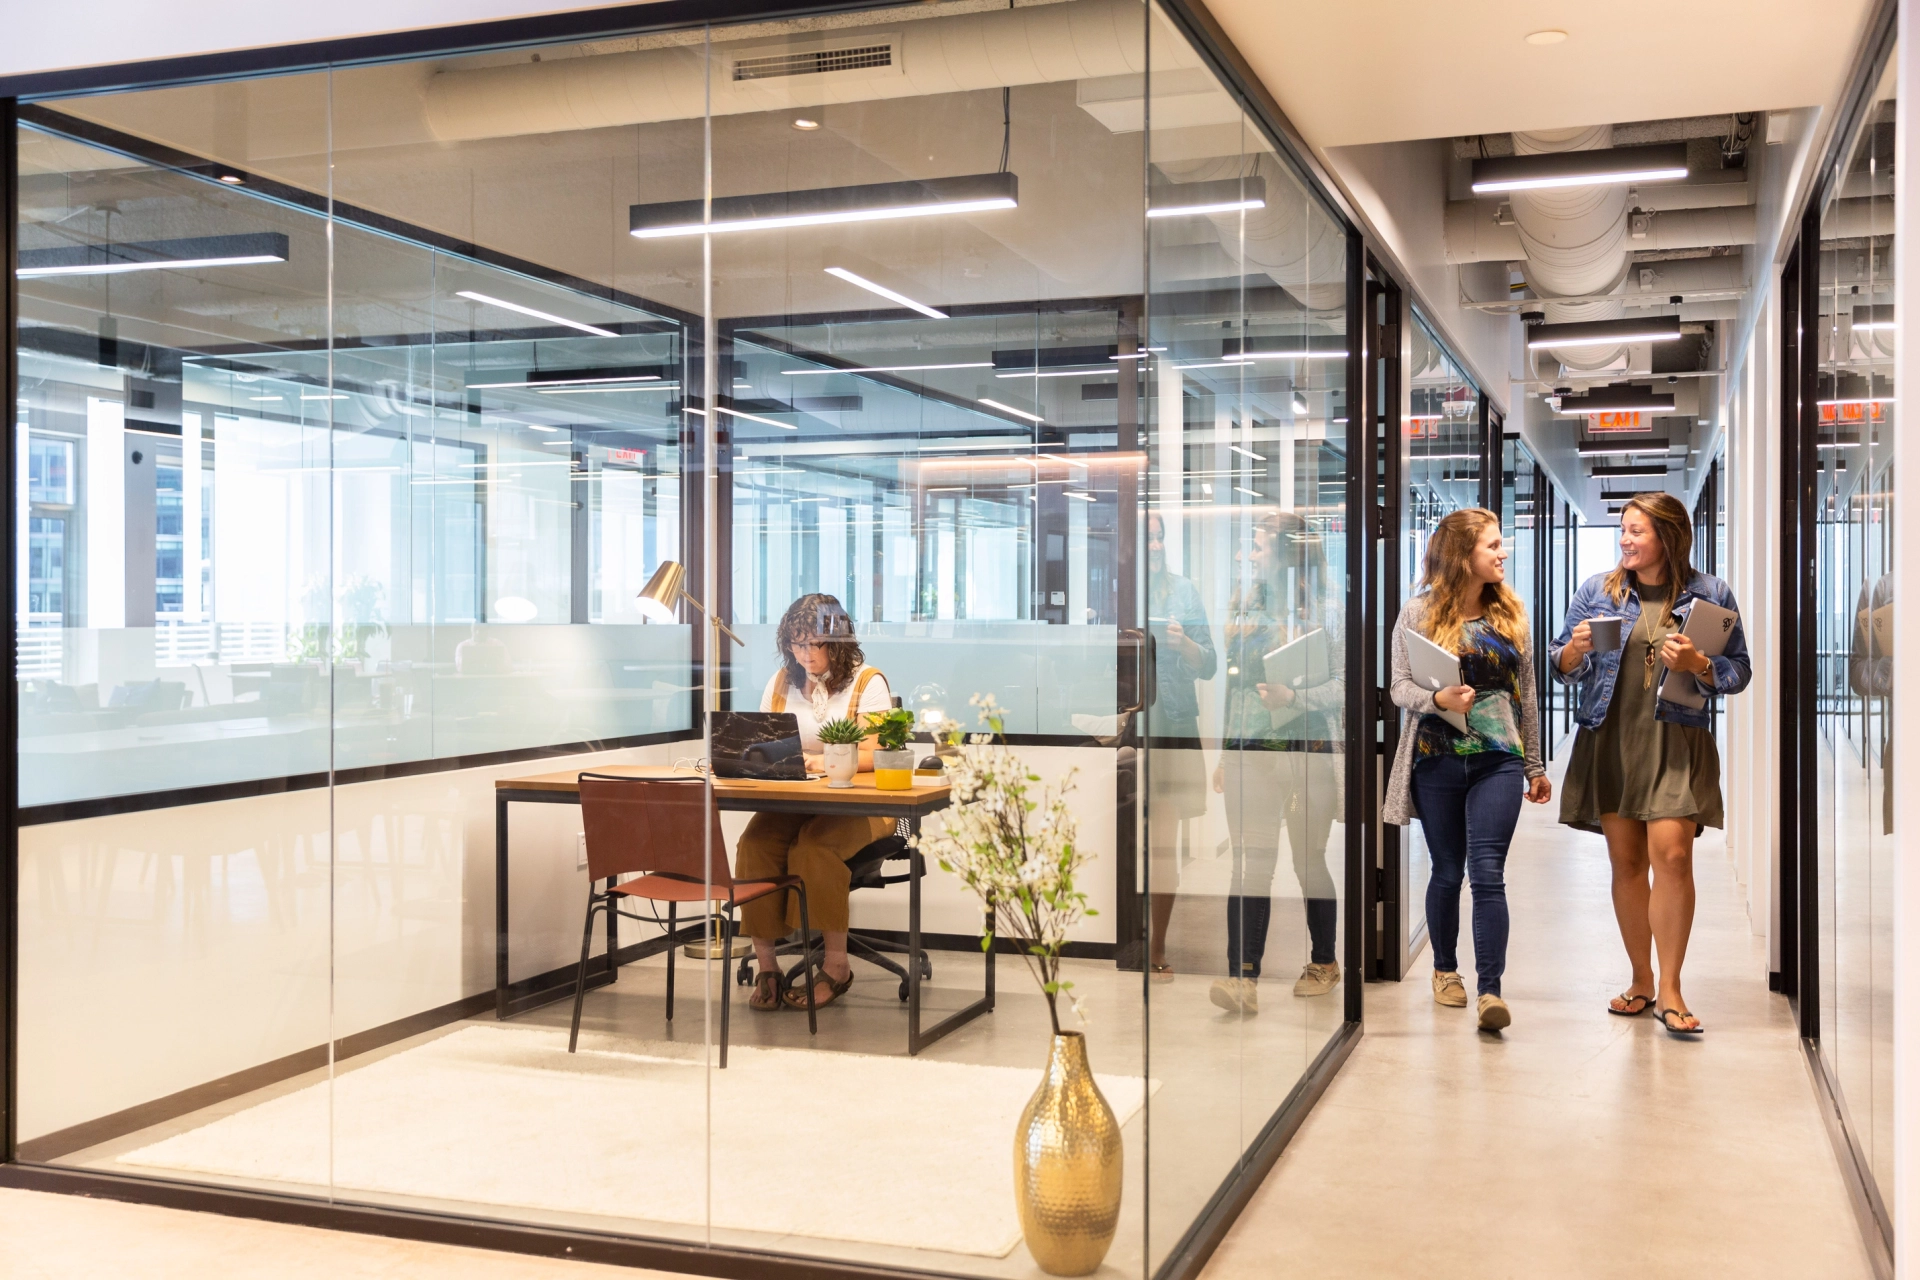 A coworking space in Boston with glass walls.